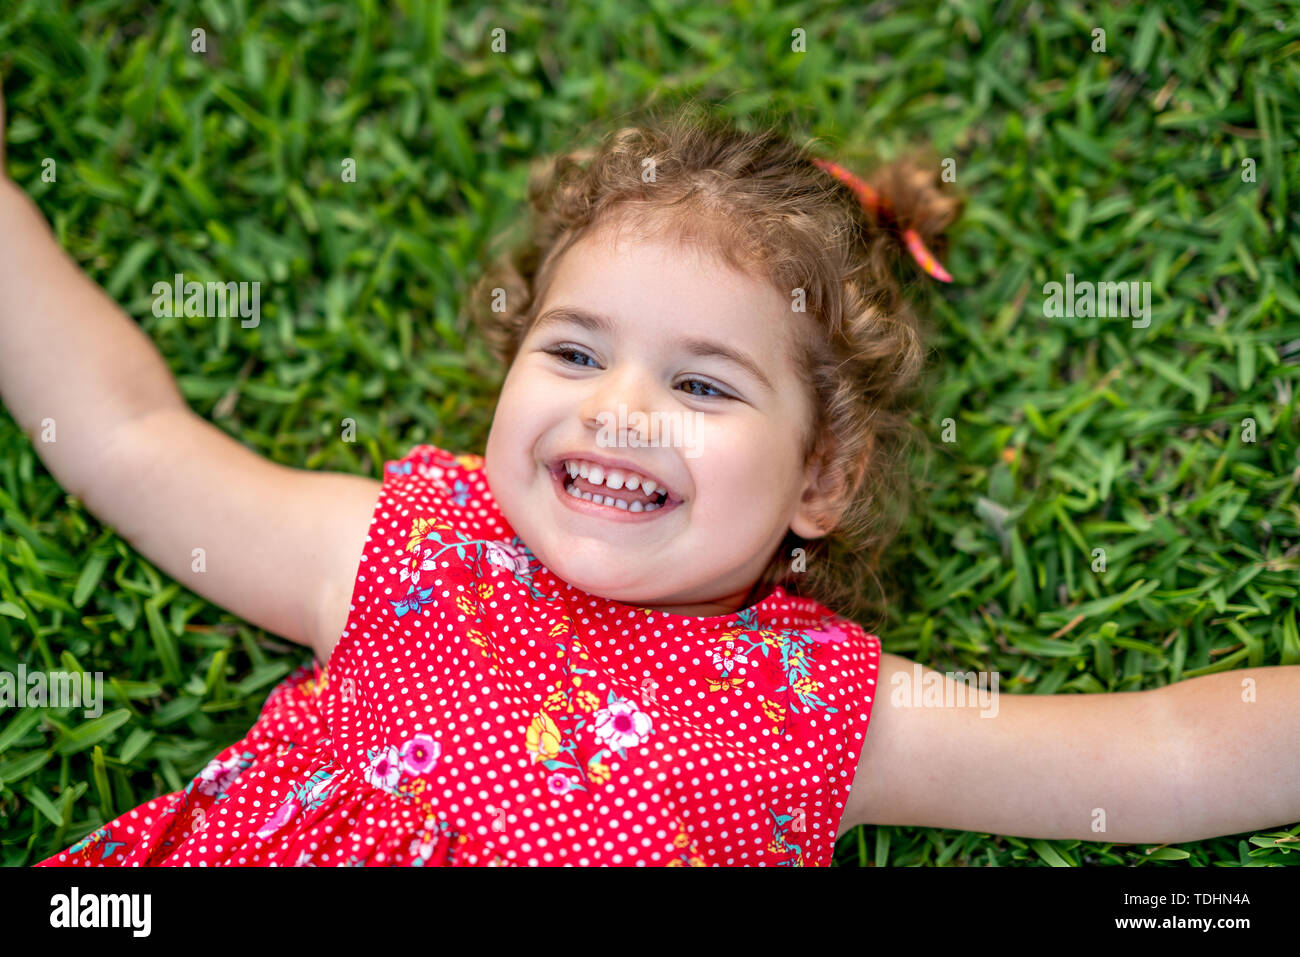 Happy Smiling Little Girl Laying On Grass In Park avec robe rouge. Banque D'Images